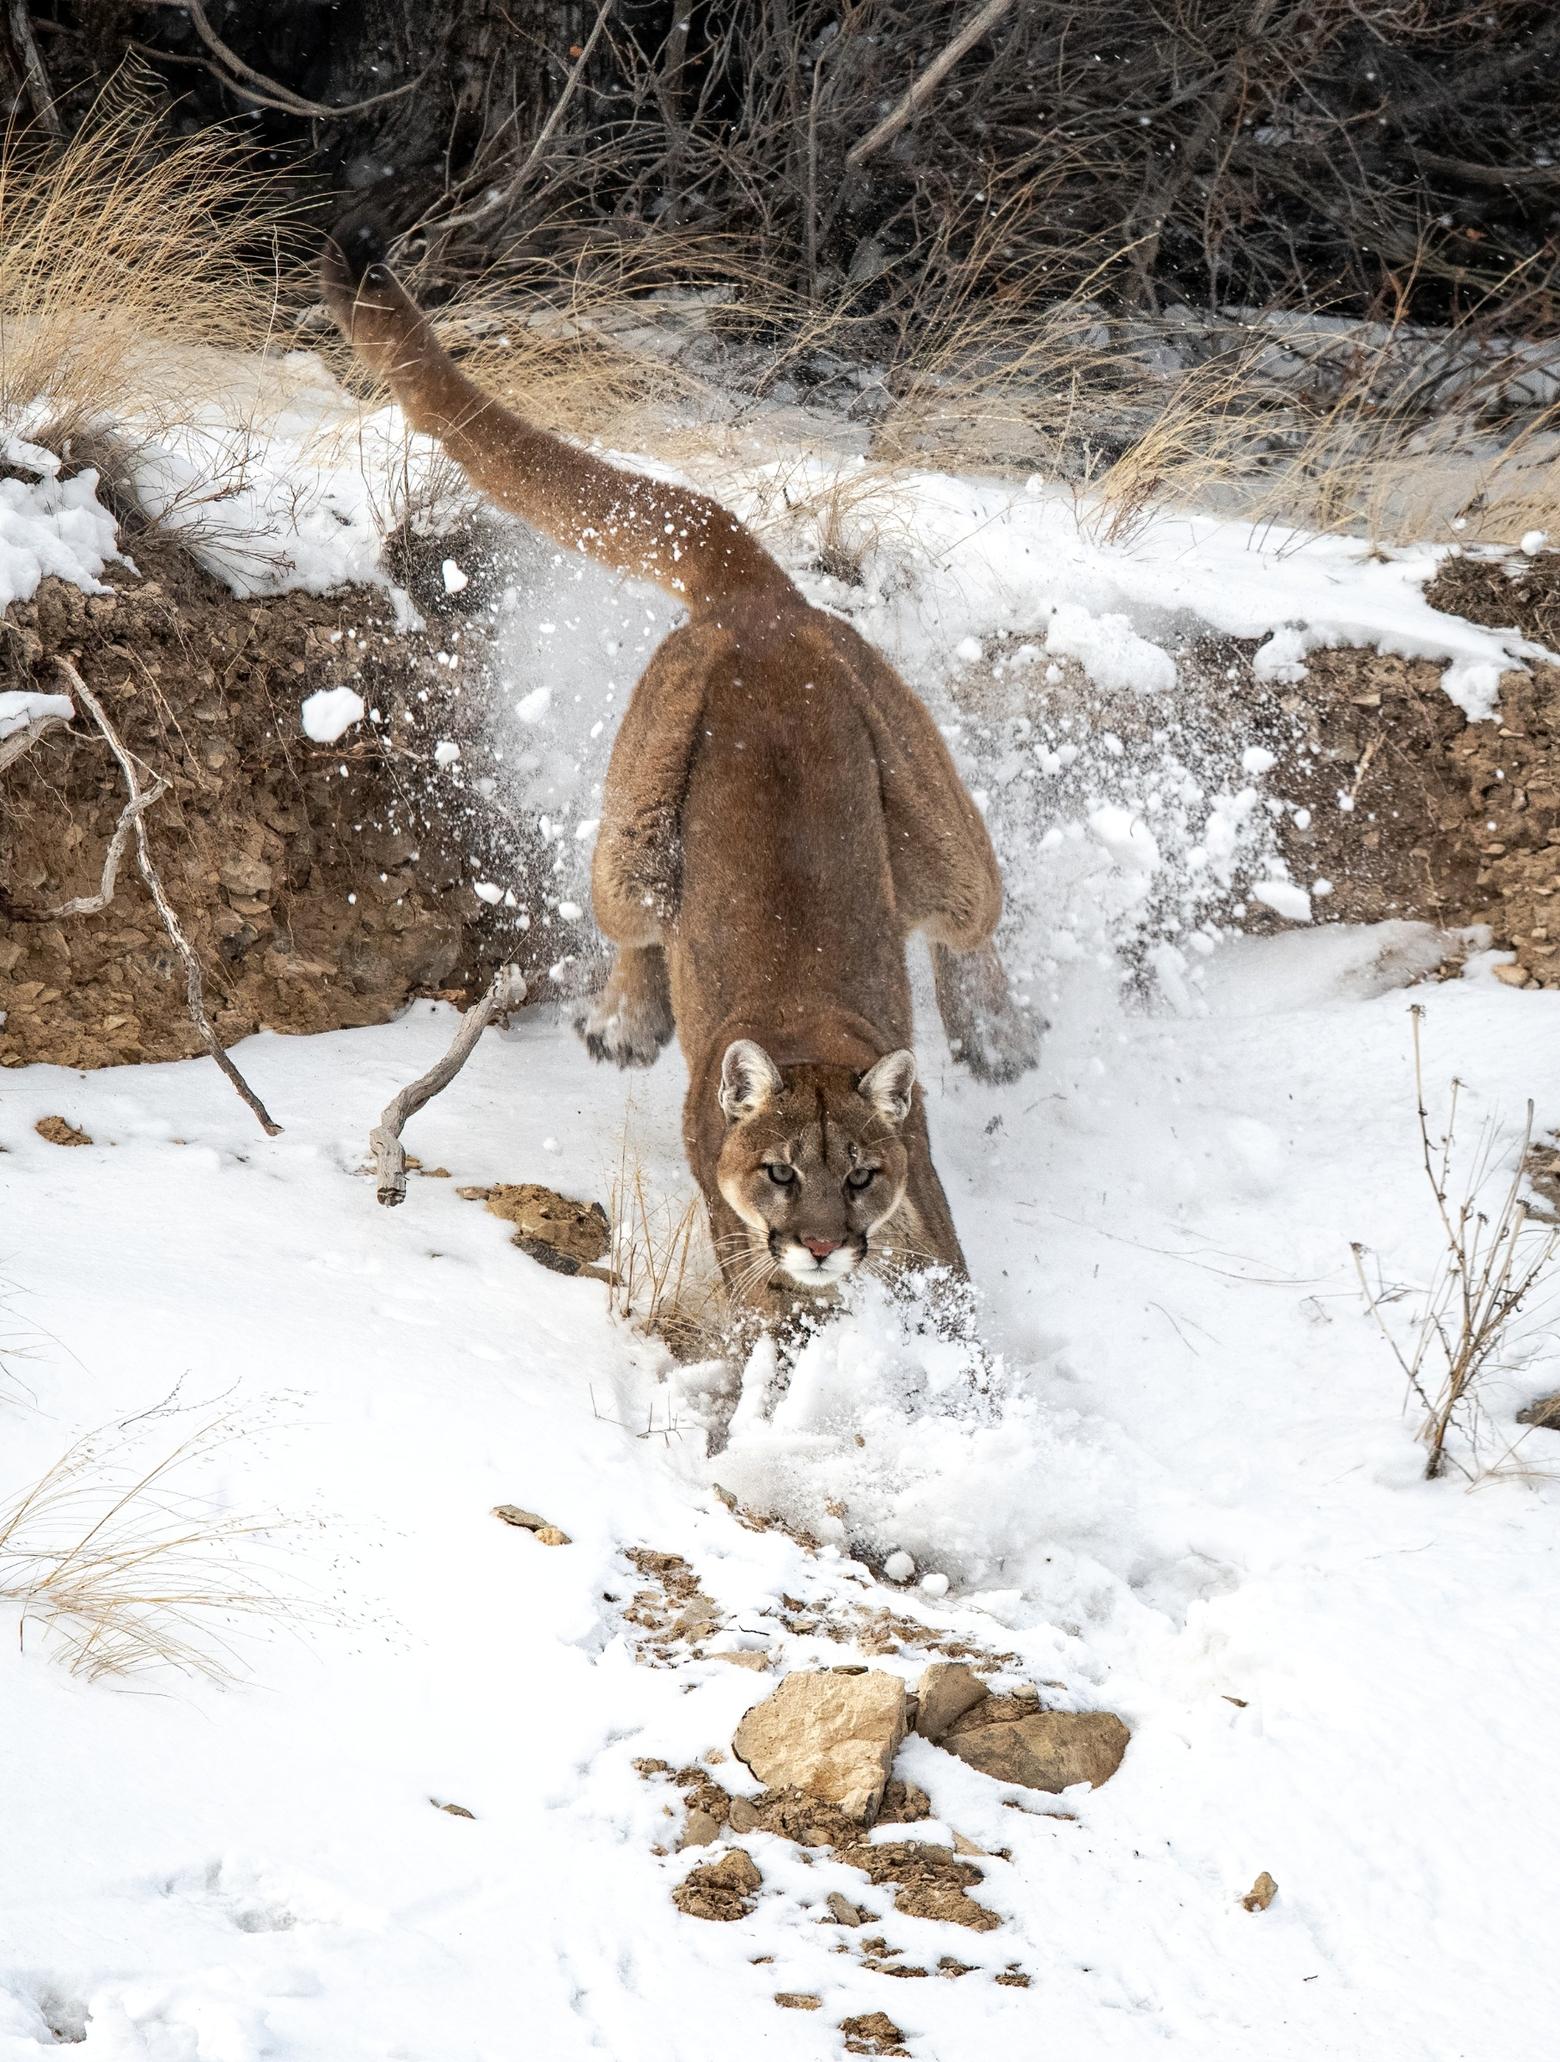 Mountain lions can leap 40 feet horizontally from a standstill and 20 feet vertically, and males can weigh up to 200 pounds. Photo by Savannah Rose